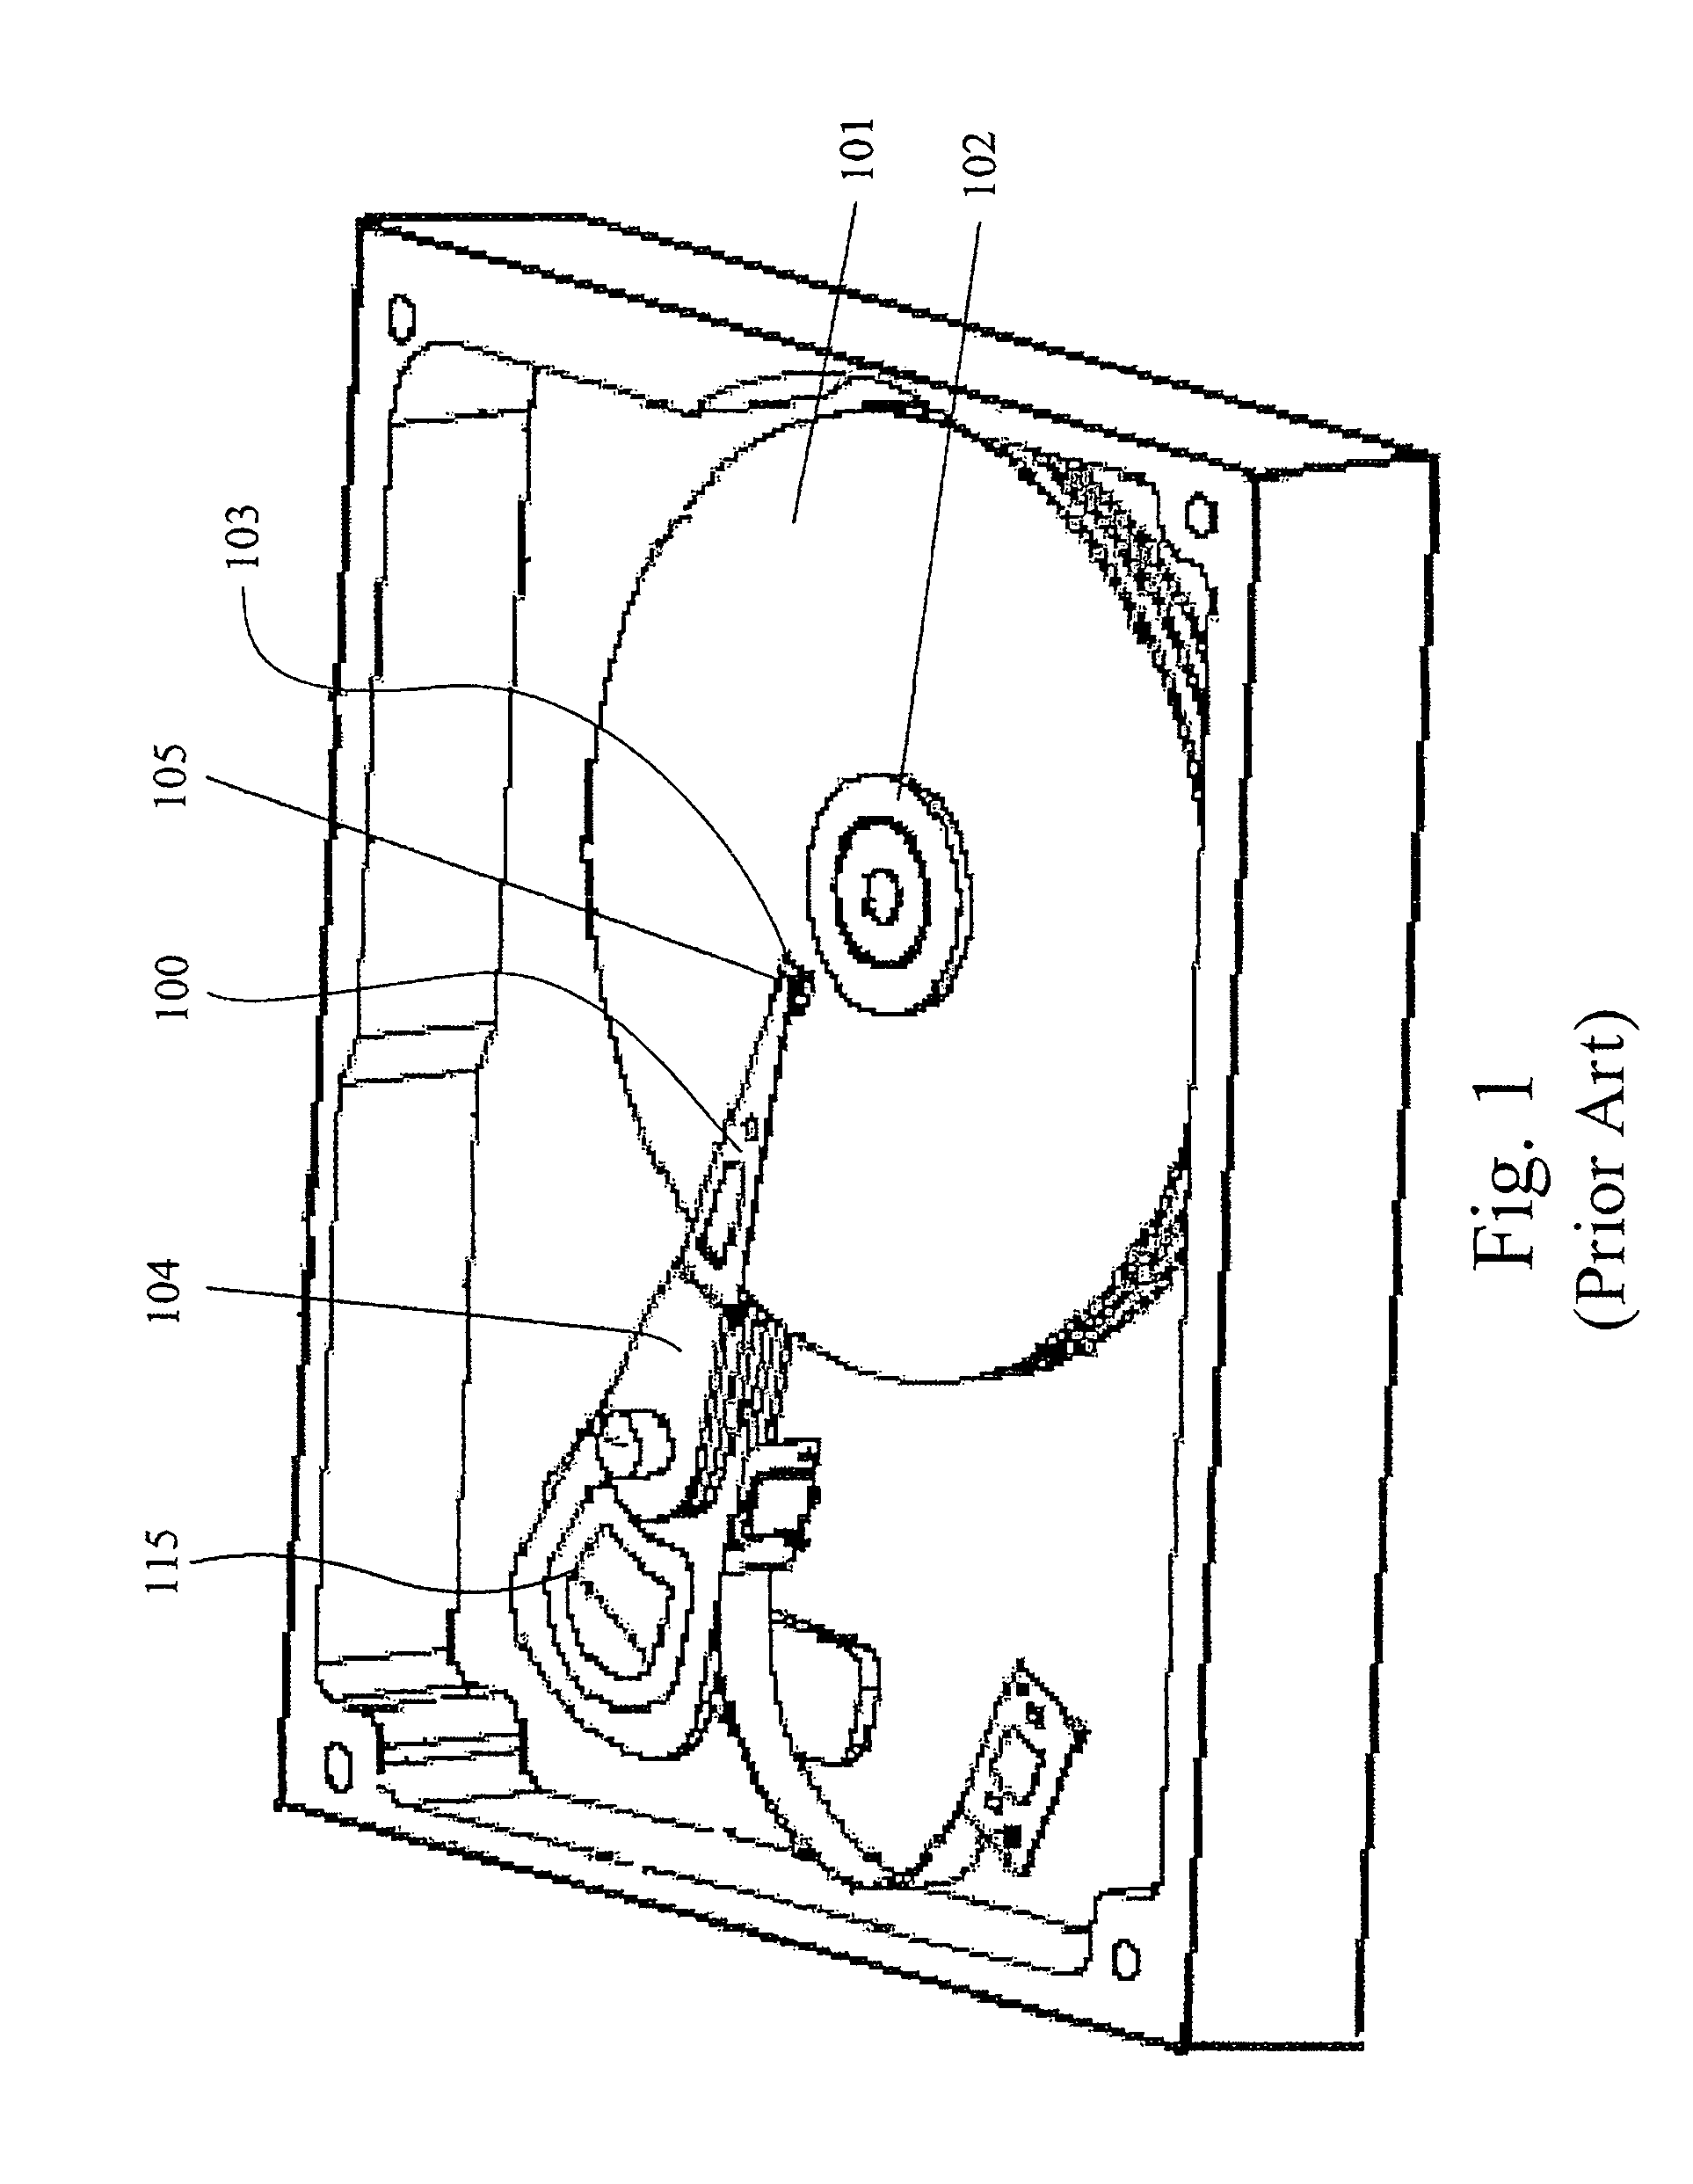 Miro-actuator, head gimbal assembly, and disk drive unit with the same